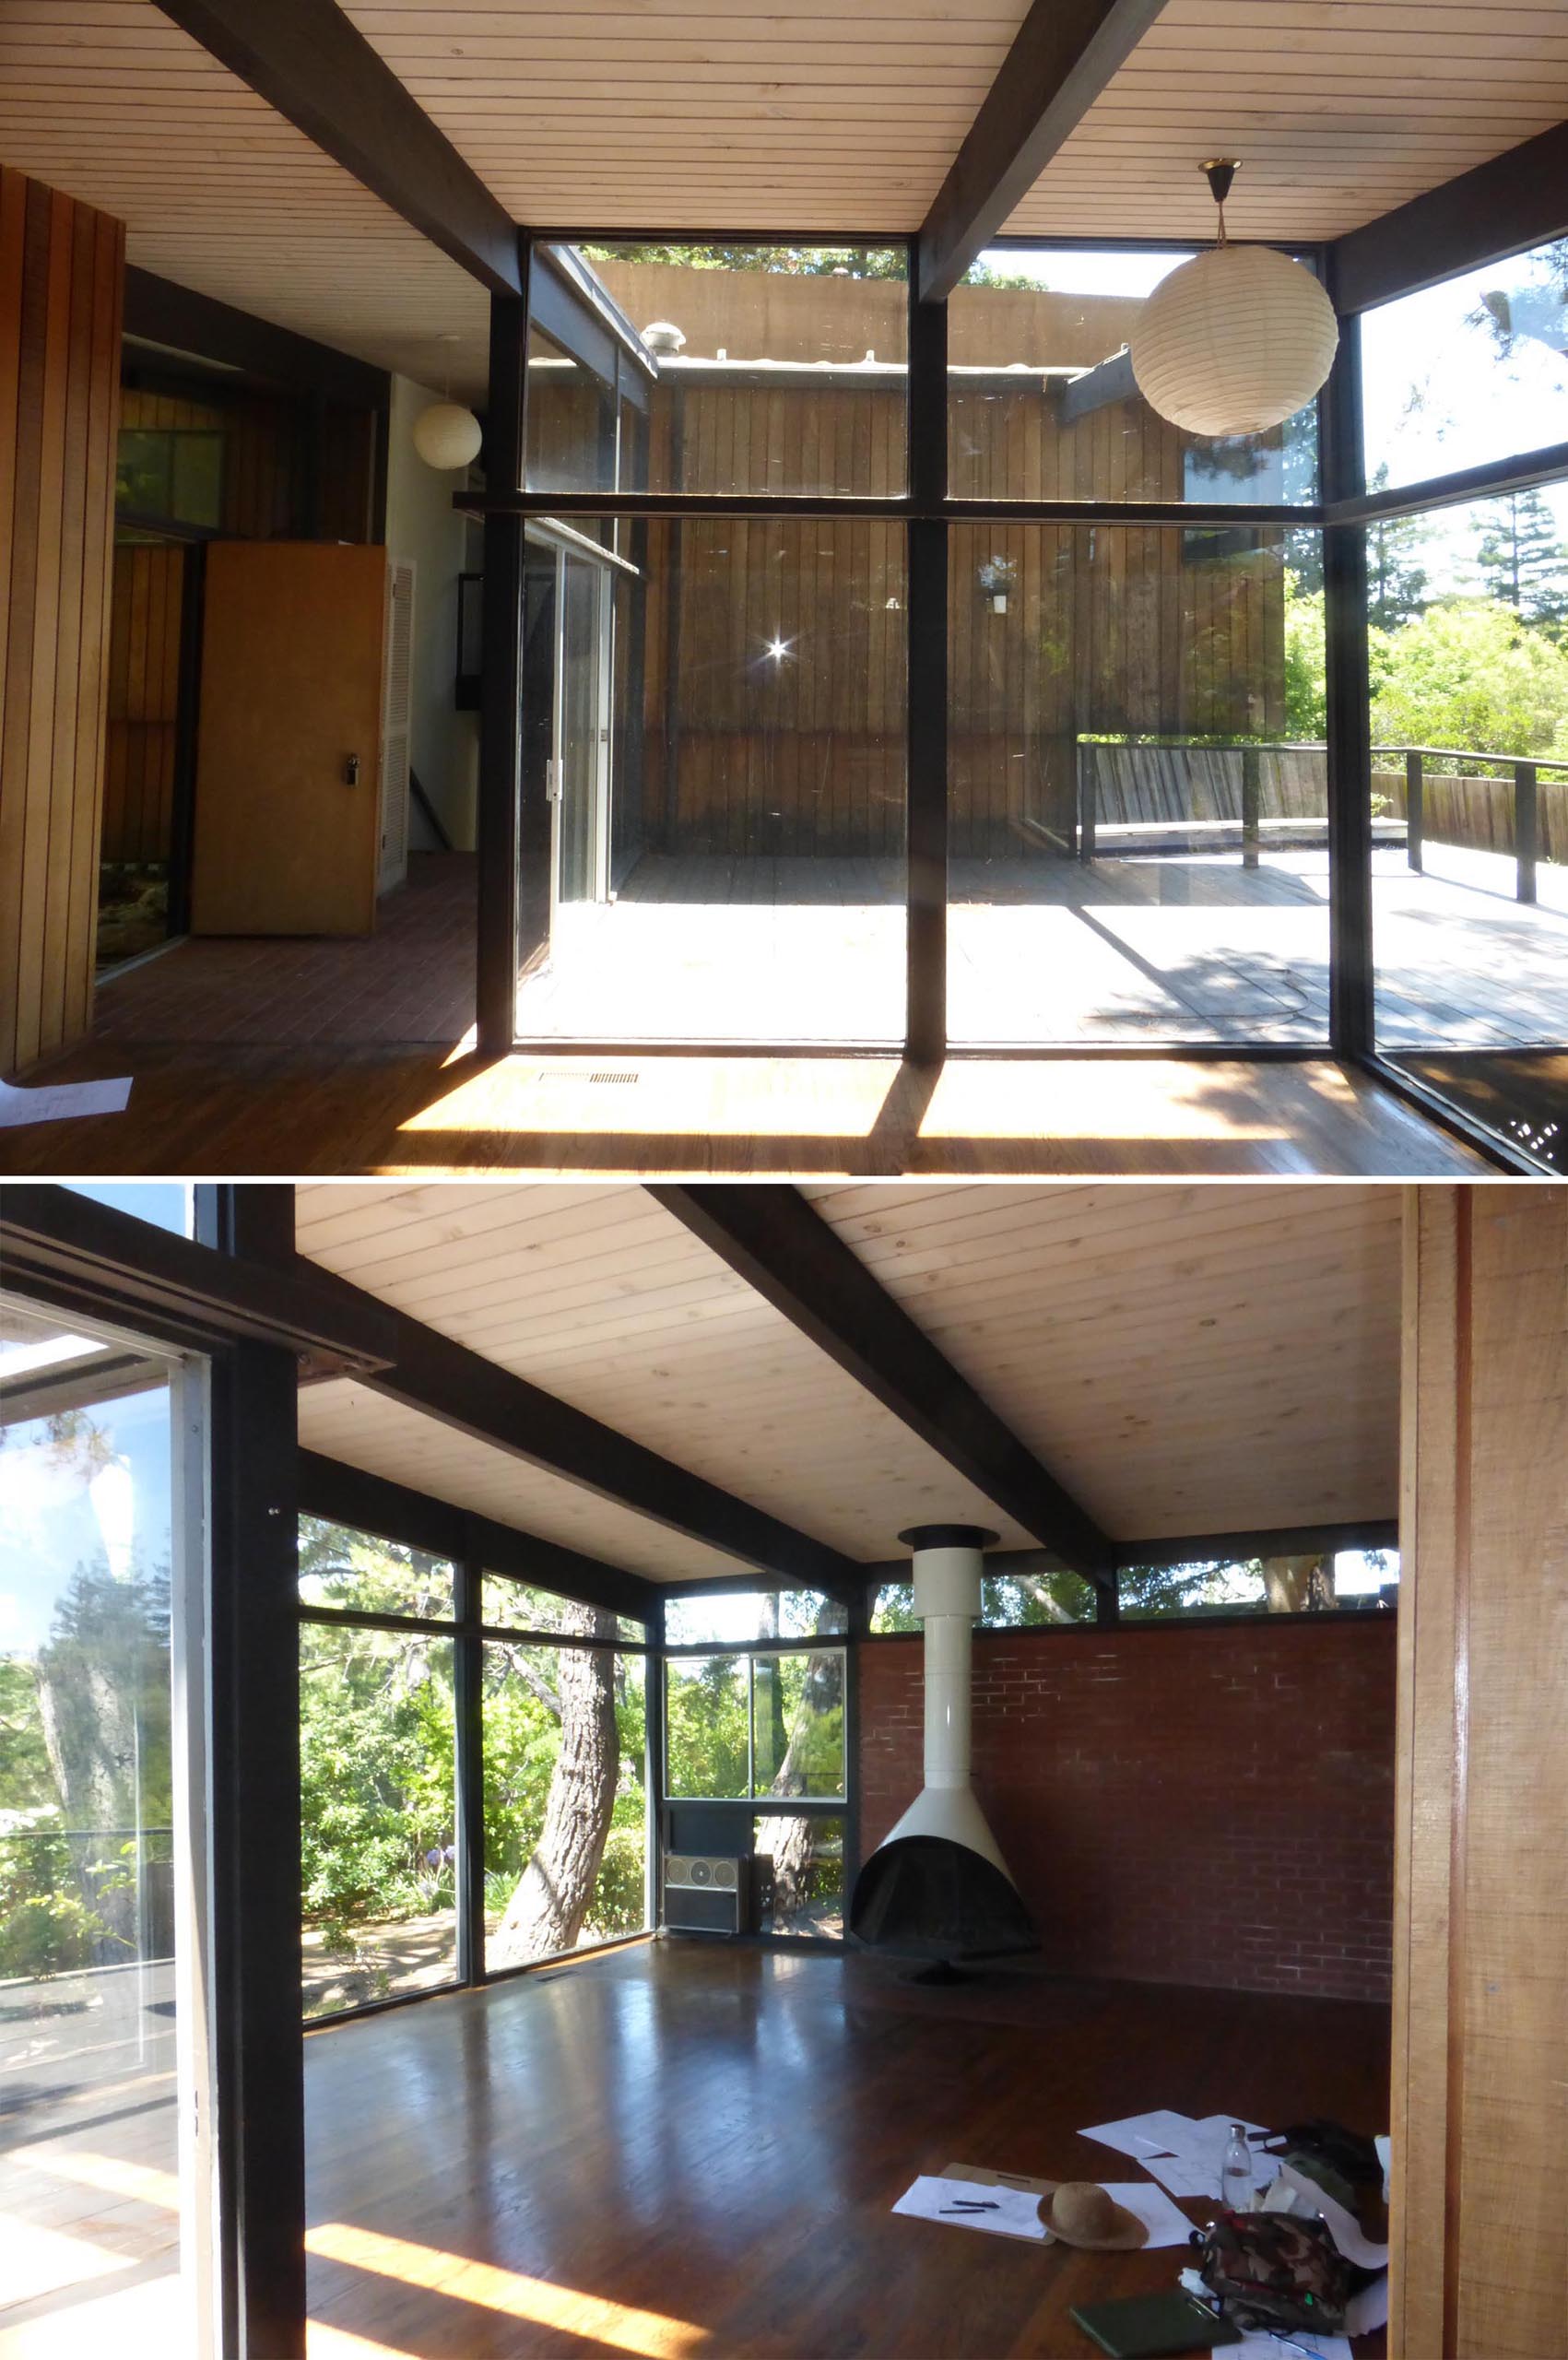 Before Photos - The original home designed by Roger Lee in 1962 included dated materials and finishes, small rooms, single-paned glass, and uninsulated walls.